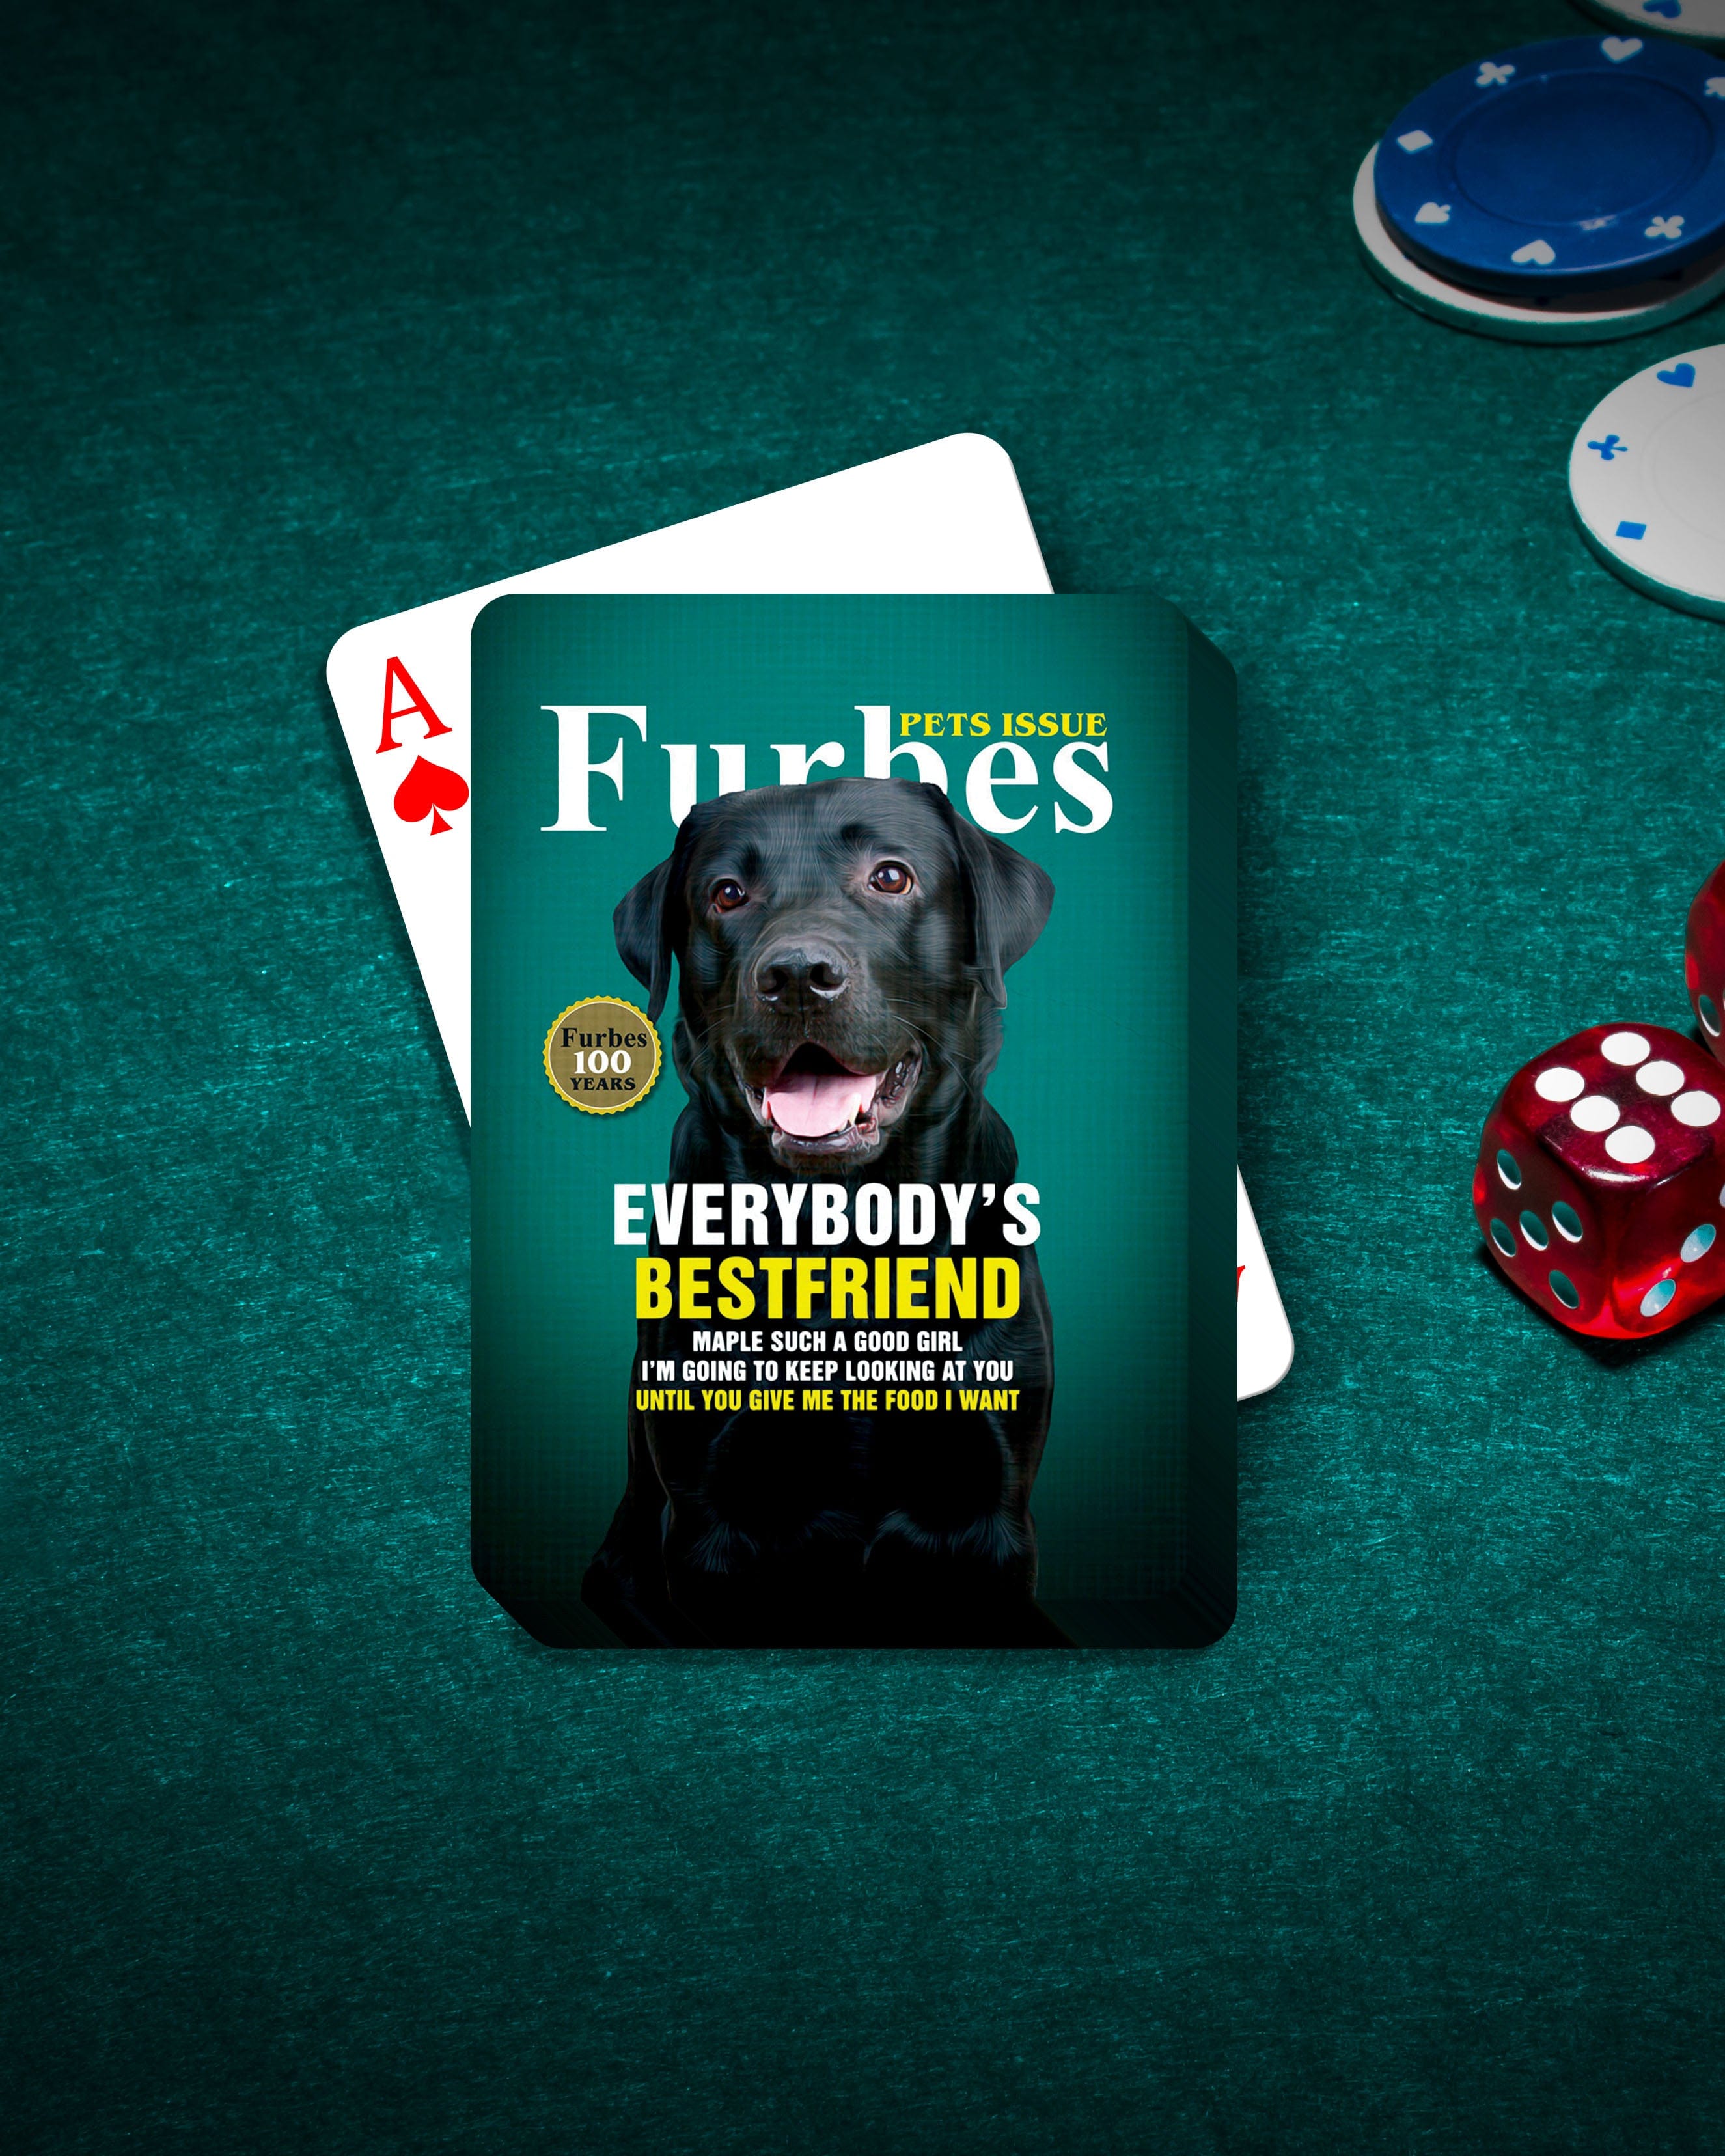 &#39;Furbes&#39; Personalized Pet Playing Cards